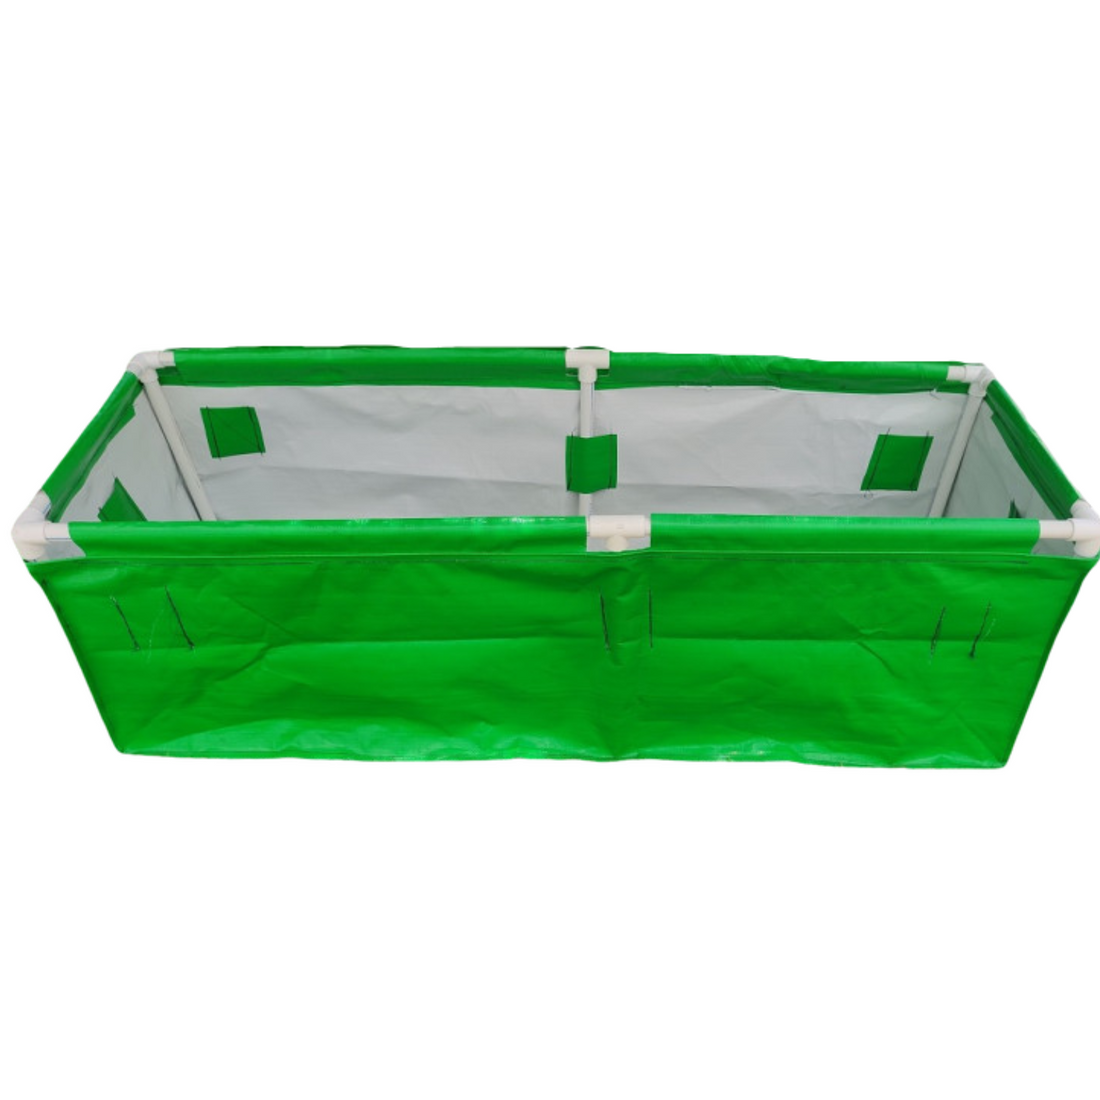 60x24x18 Inches (5x2x1.5 Ft) - 400 GSM HDPE Rectangular Grow Bag With Supporting PVC Pipes